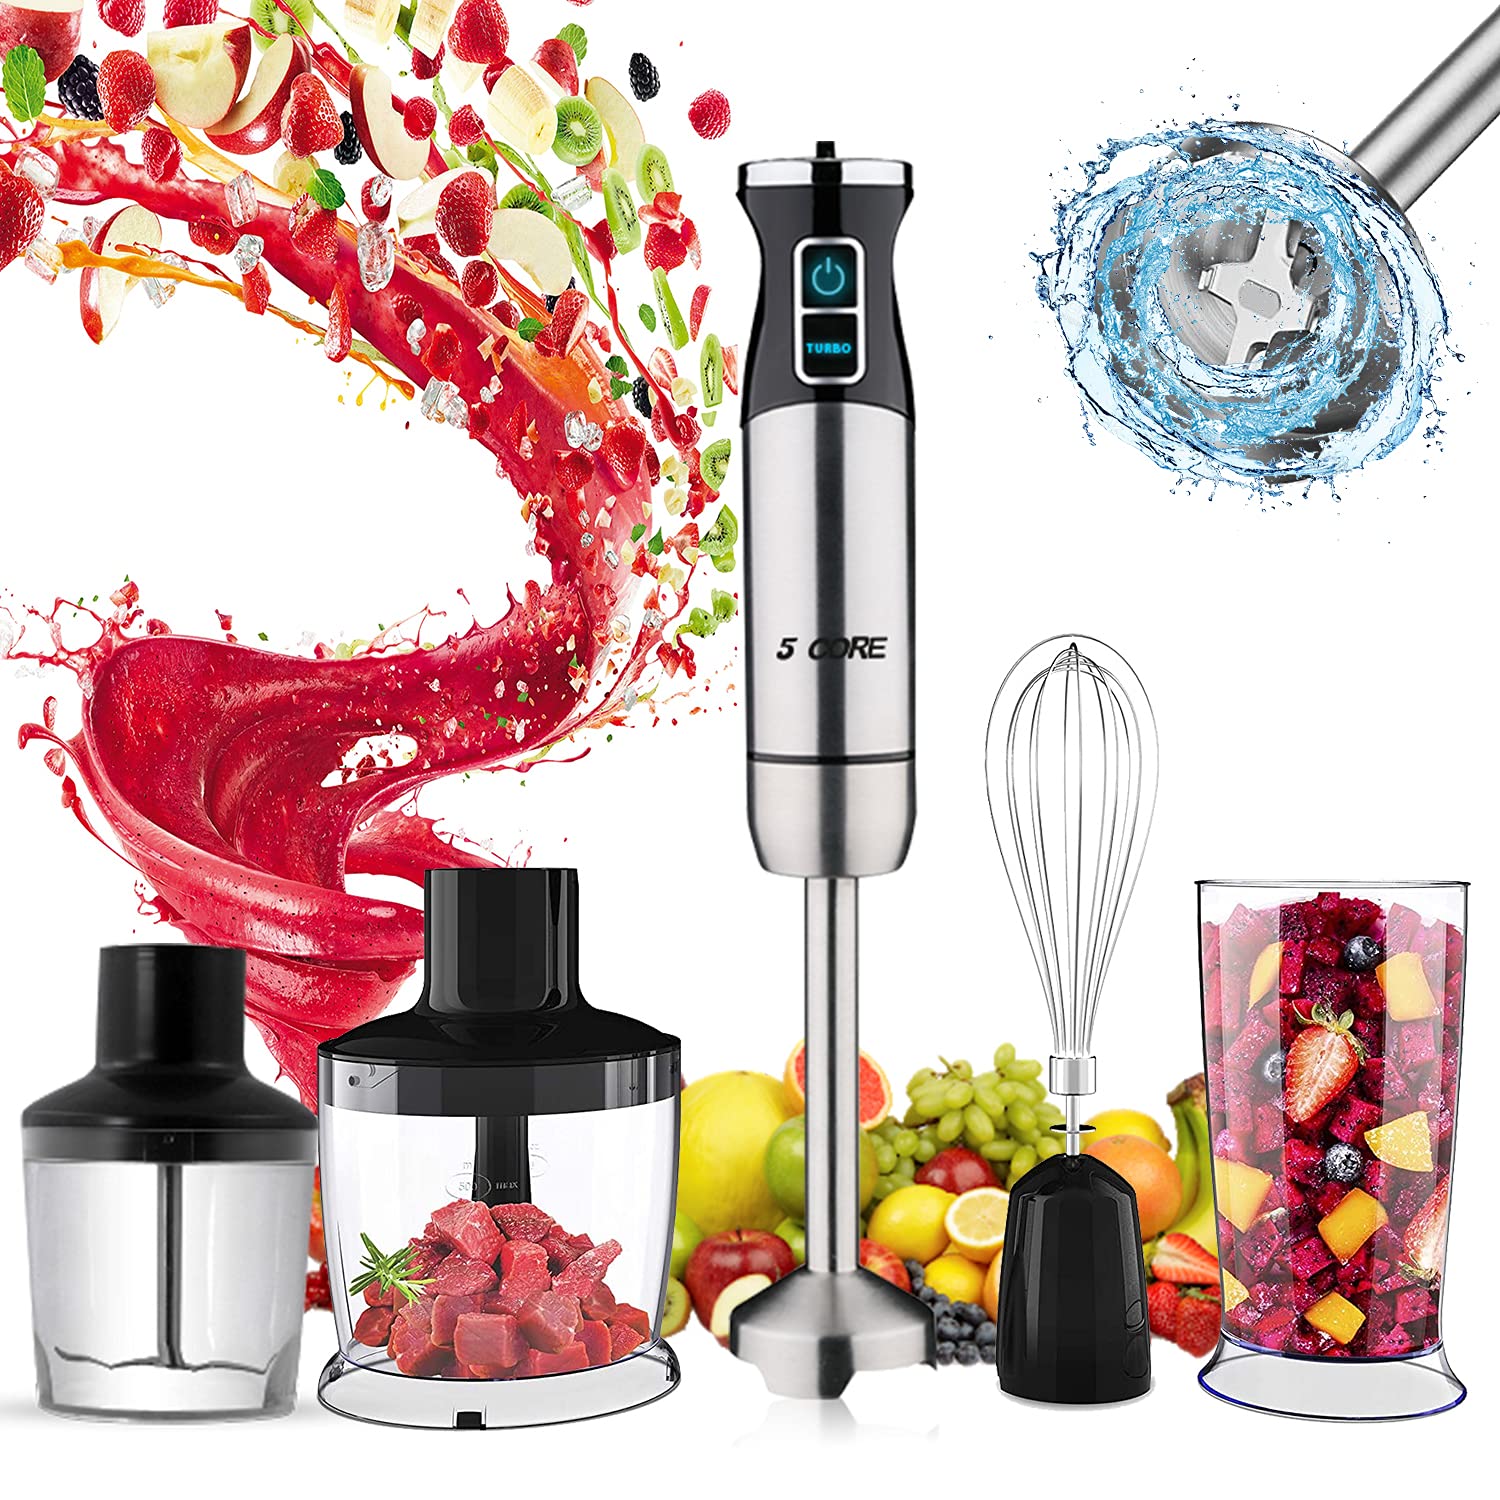 5 core Immersion Hand Blender 5-In-1 500W Handheld 8 Variable Powerful Stainless Steel BPA Free Stick Blender with Electric Whis